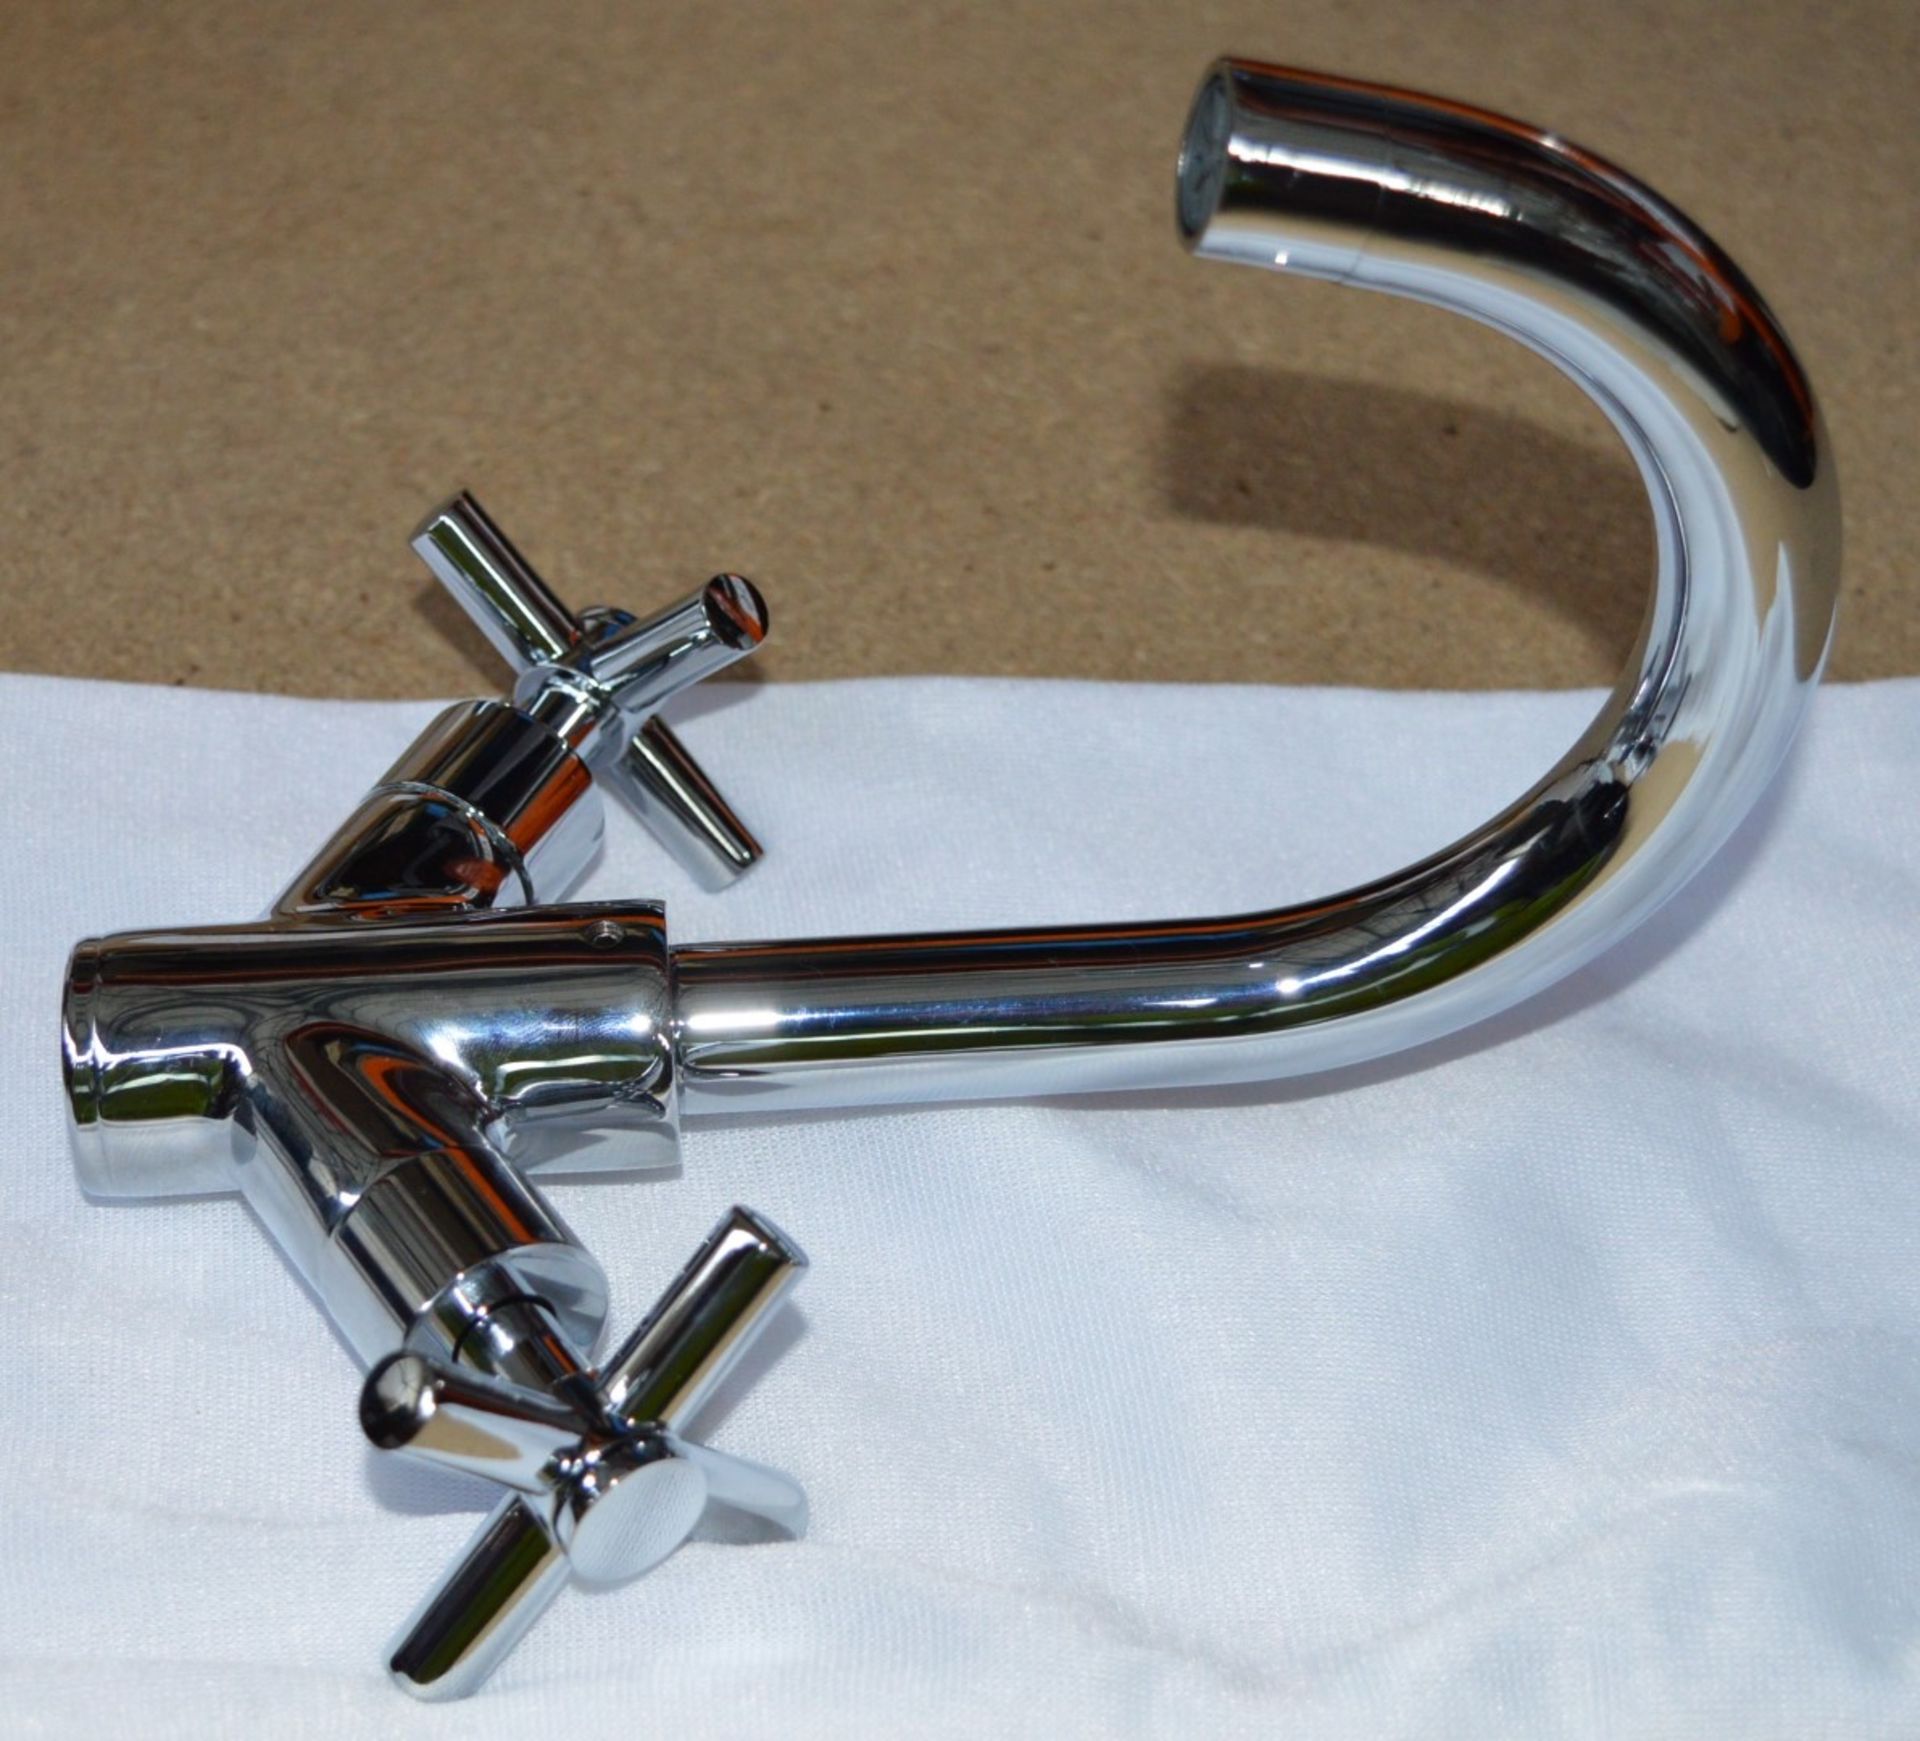 1 x Swan Neck Basin Mixer Tap - Brass Construction With Contemporary Chrome Finish - Unused - Image 2 of 6